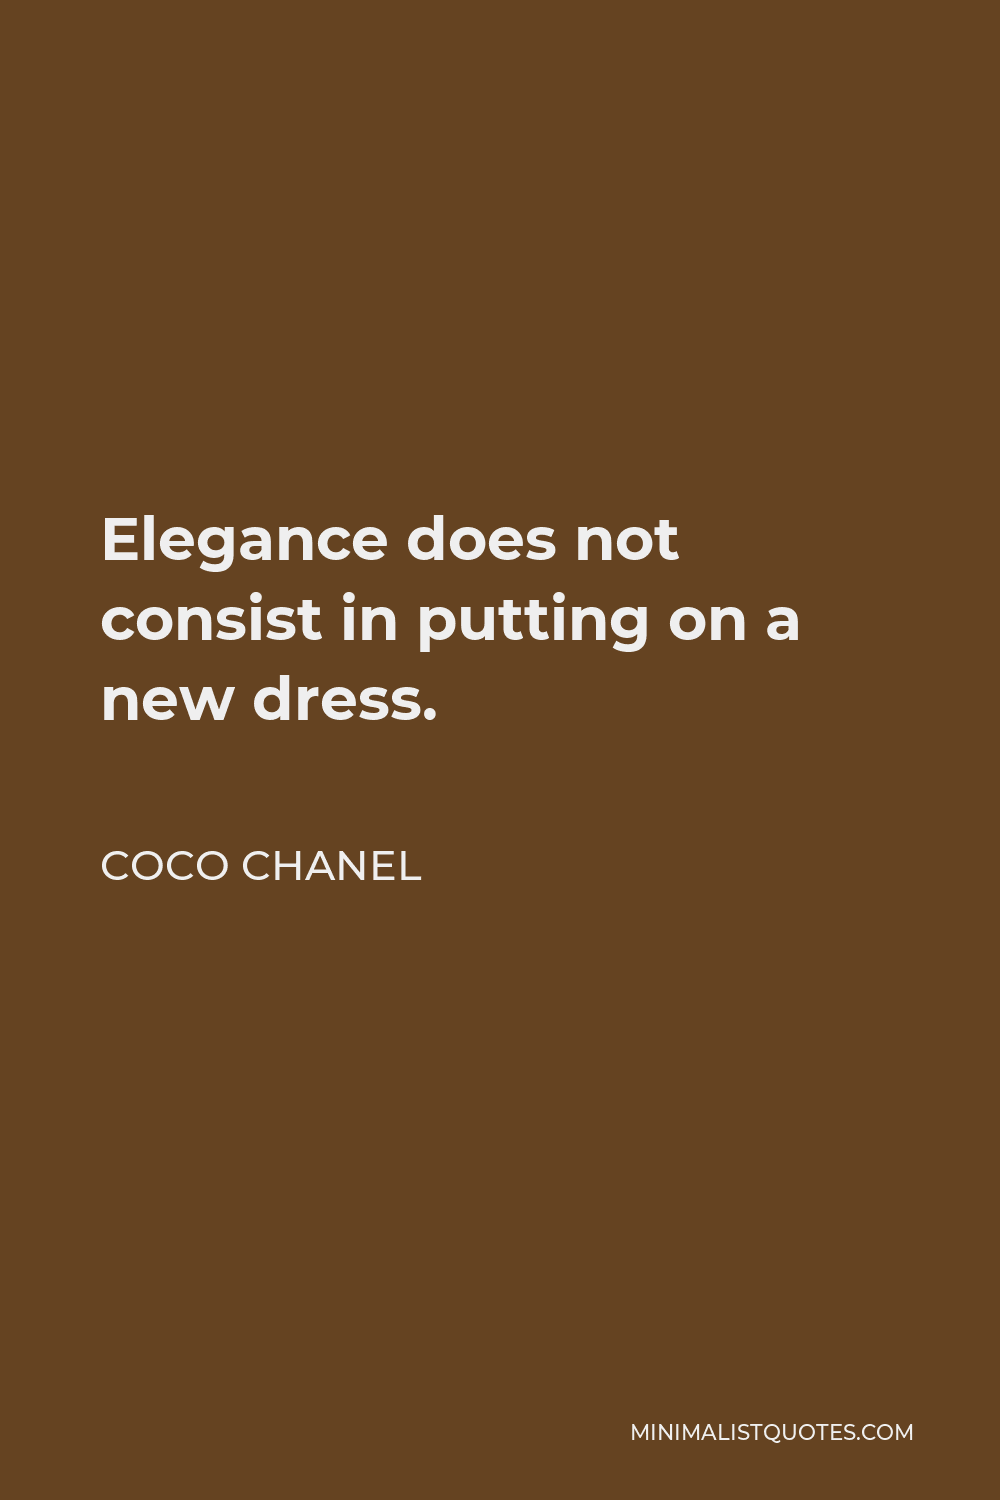 Coco Chanel Quote - Elegance does not consist in putting on a new dress.